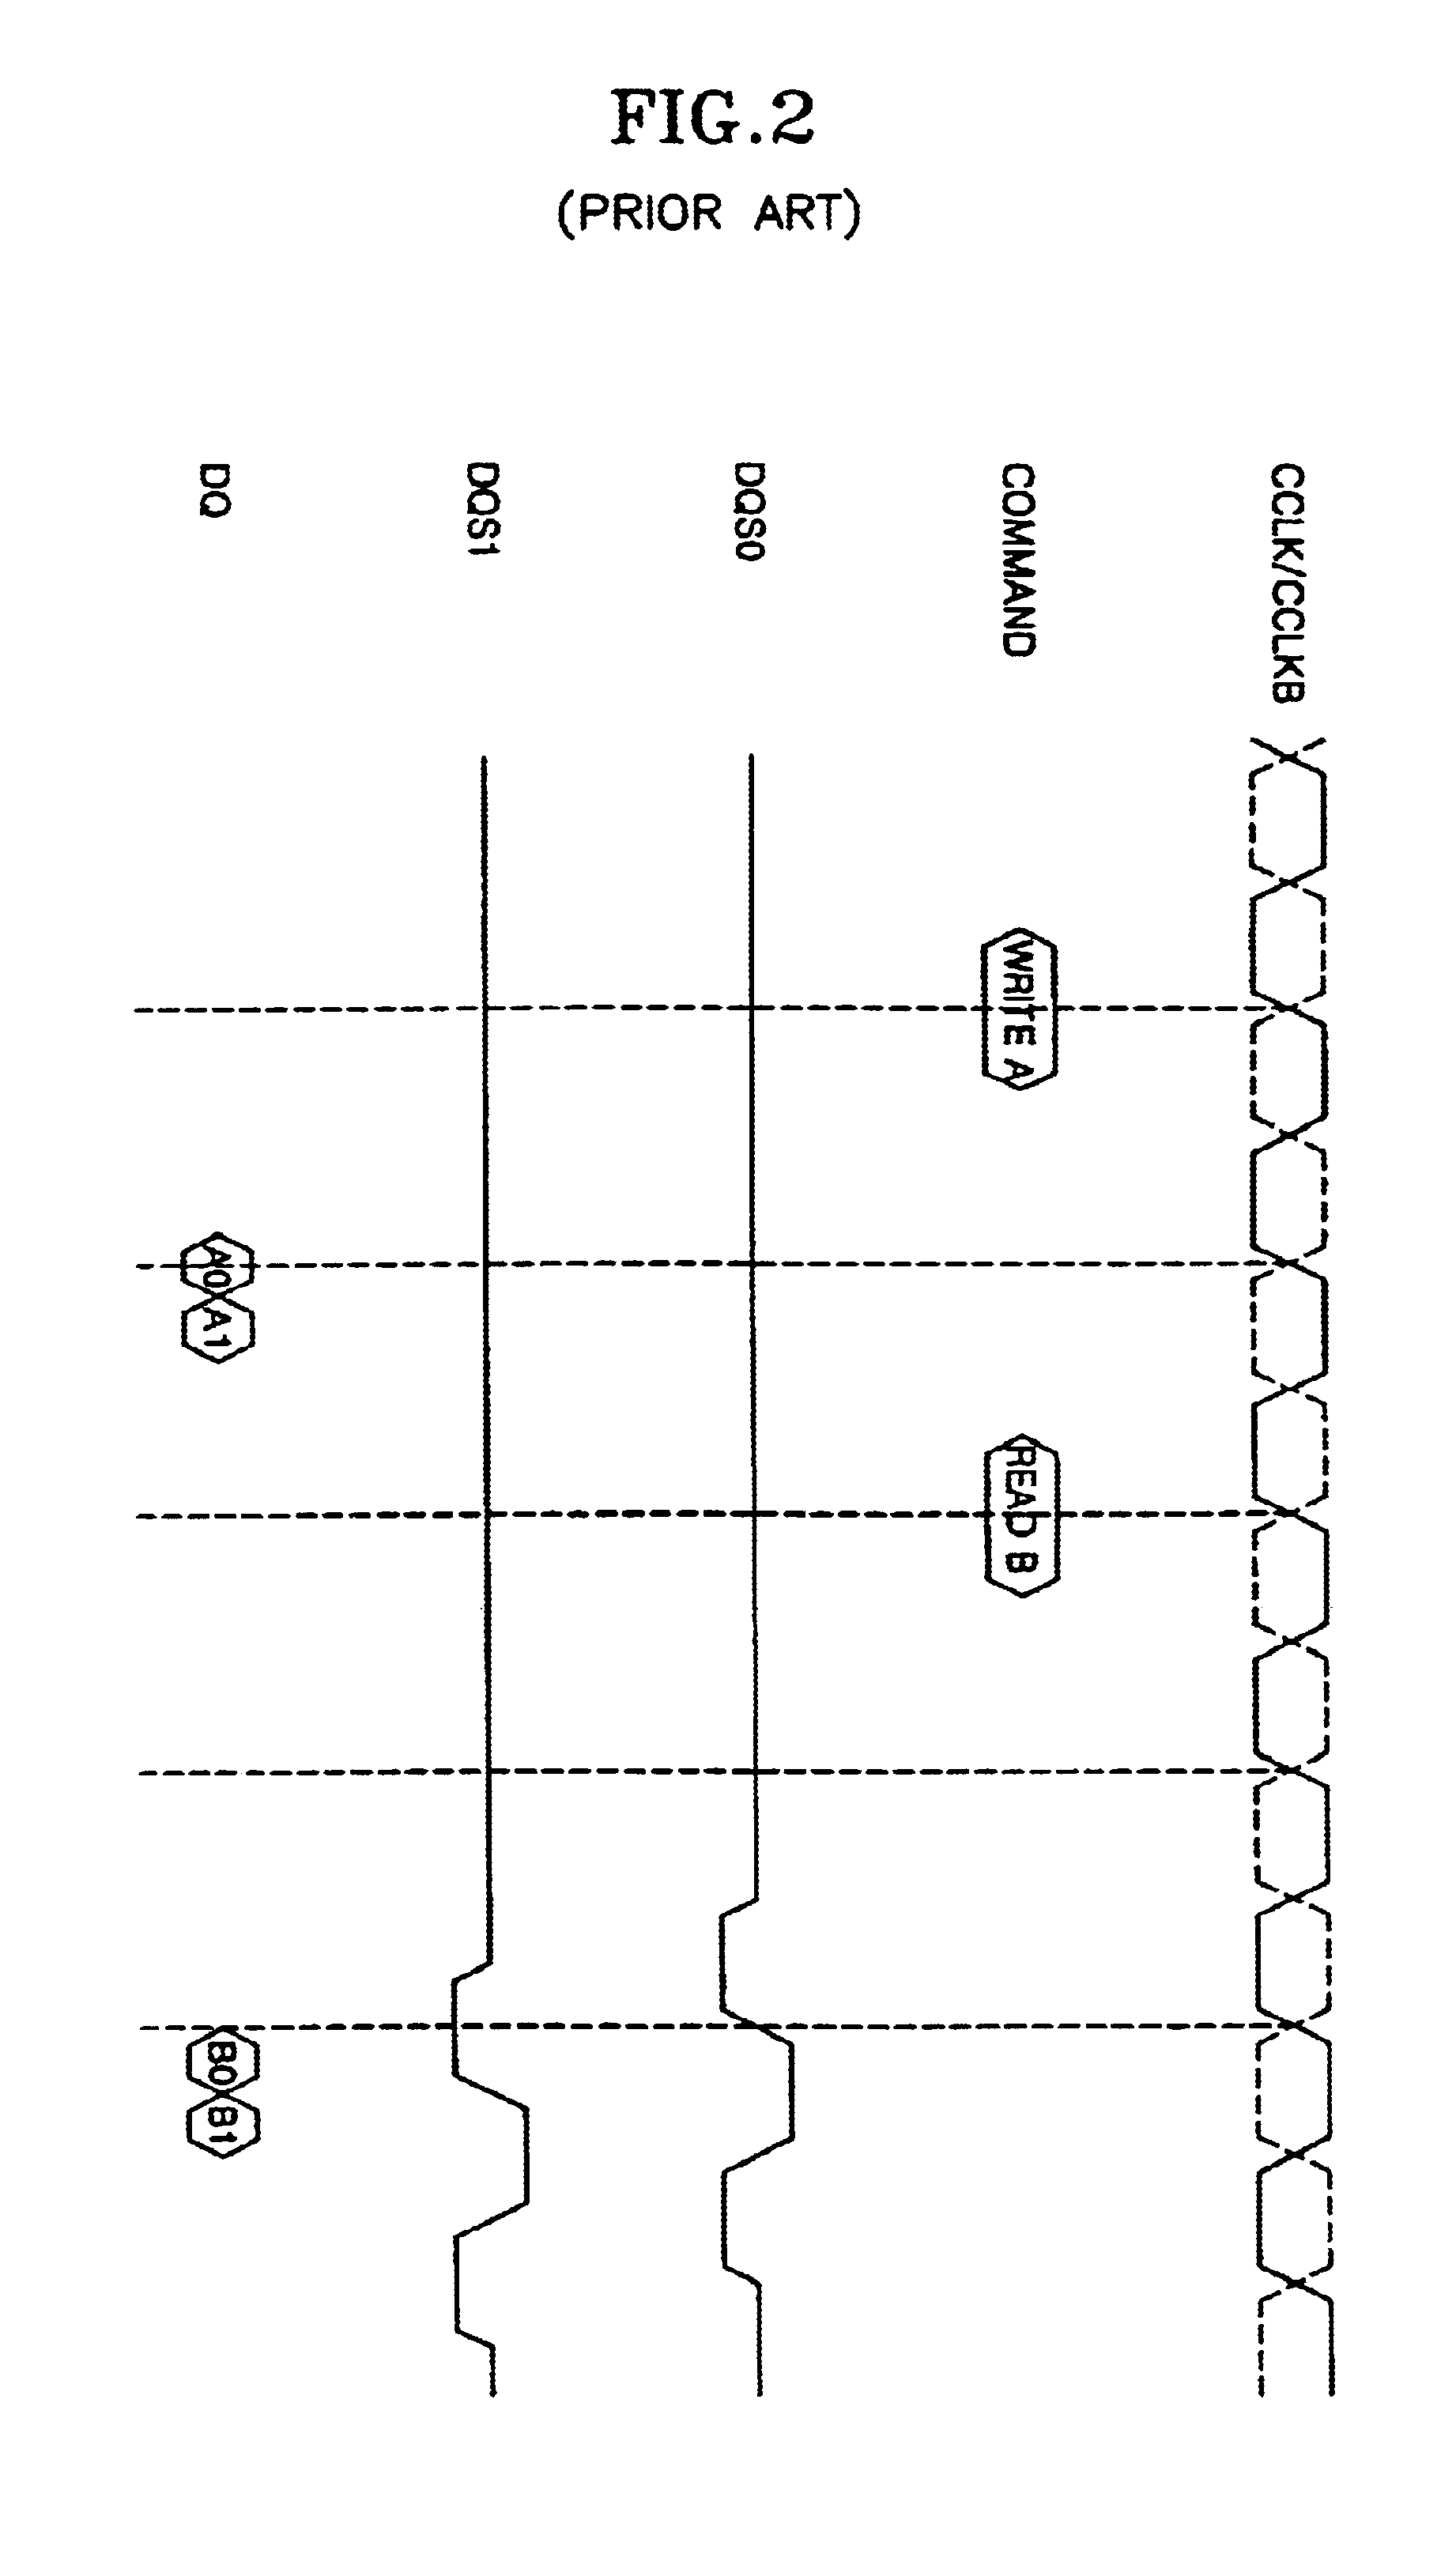 High speed interface device for reducing power consumption, circuit area and transmitting/receiving a 4 bit data in one clock period